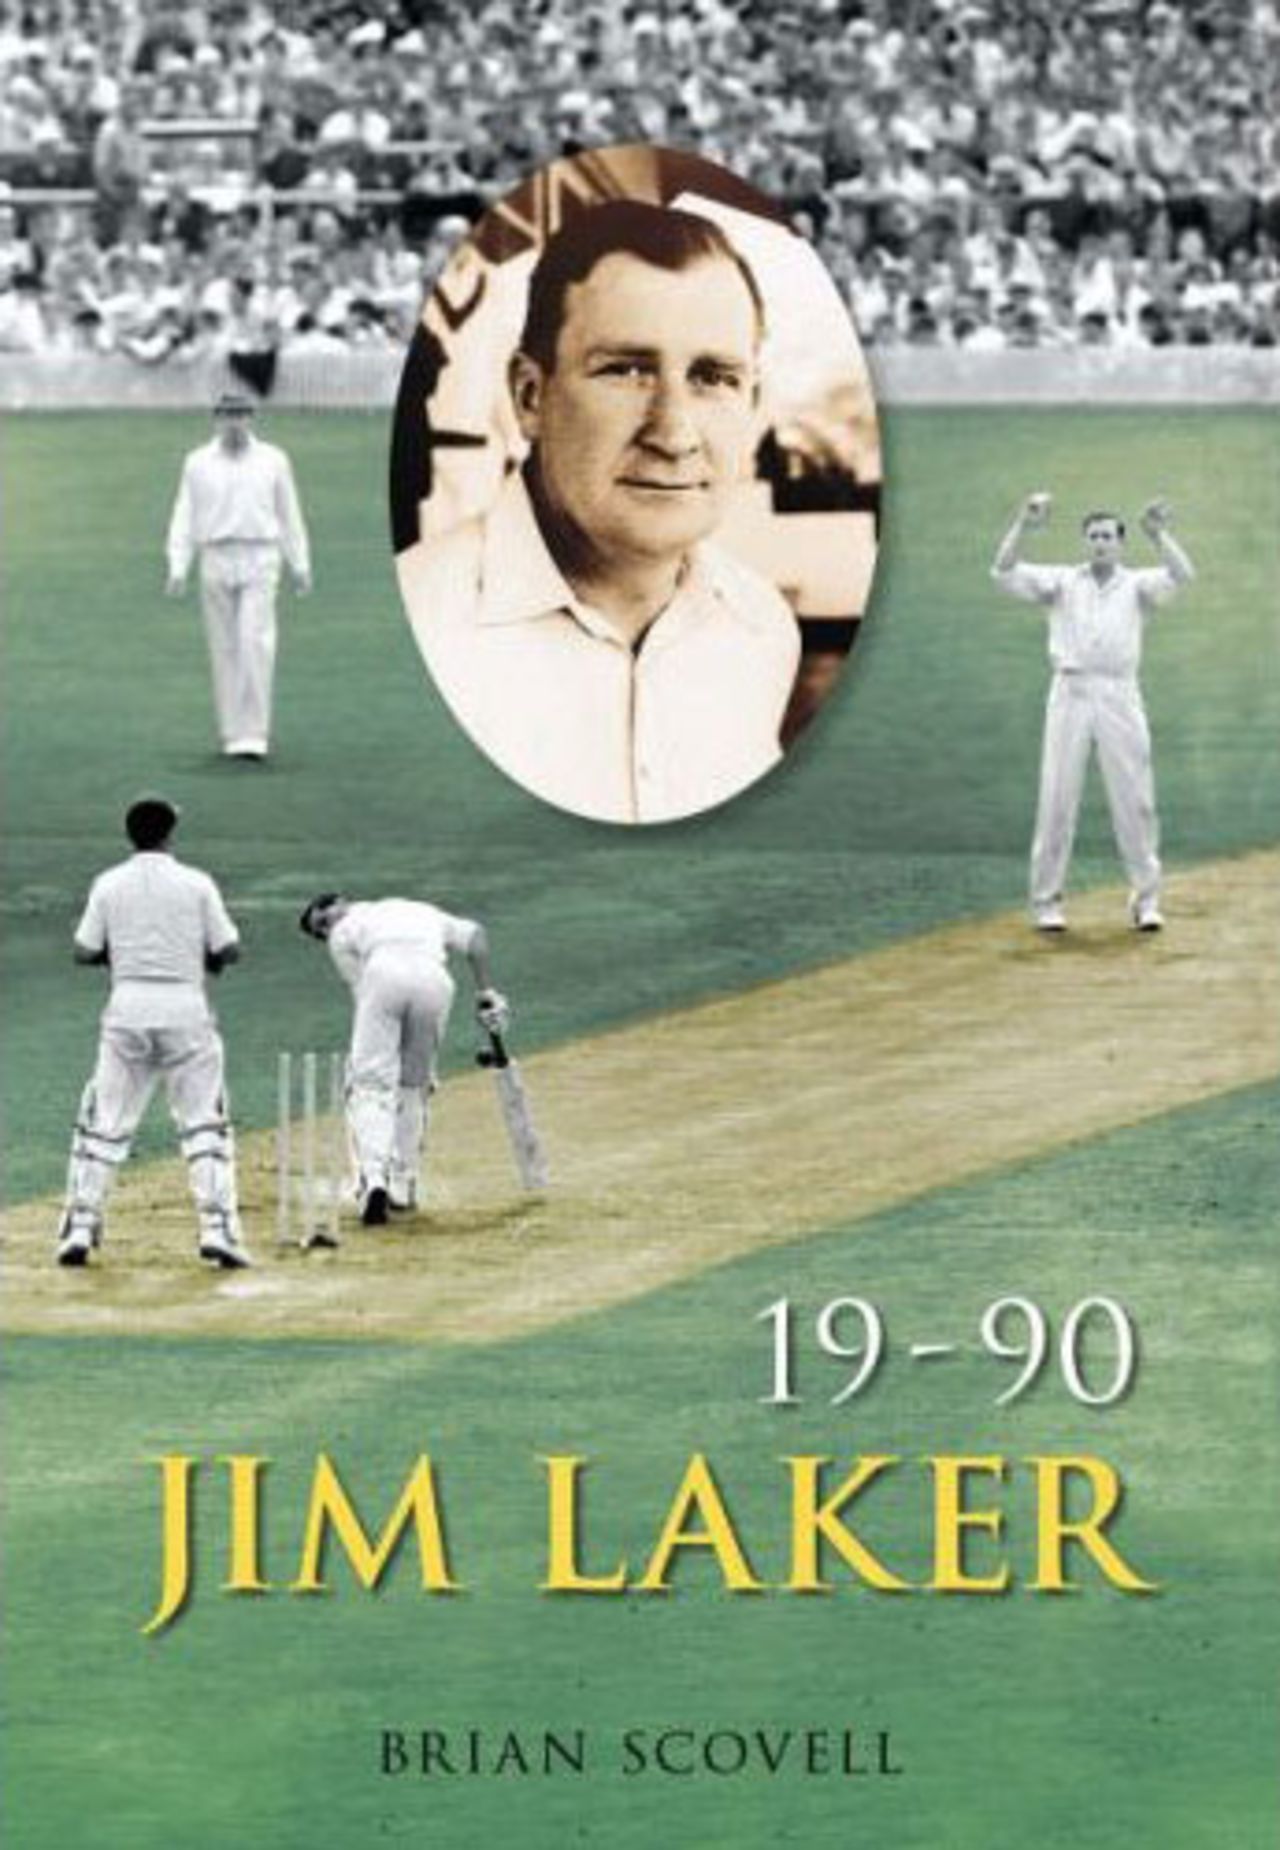 Cover of <I>19-90: Jim Laker</I> by Brian Scovell